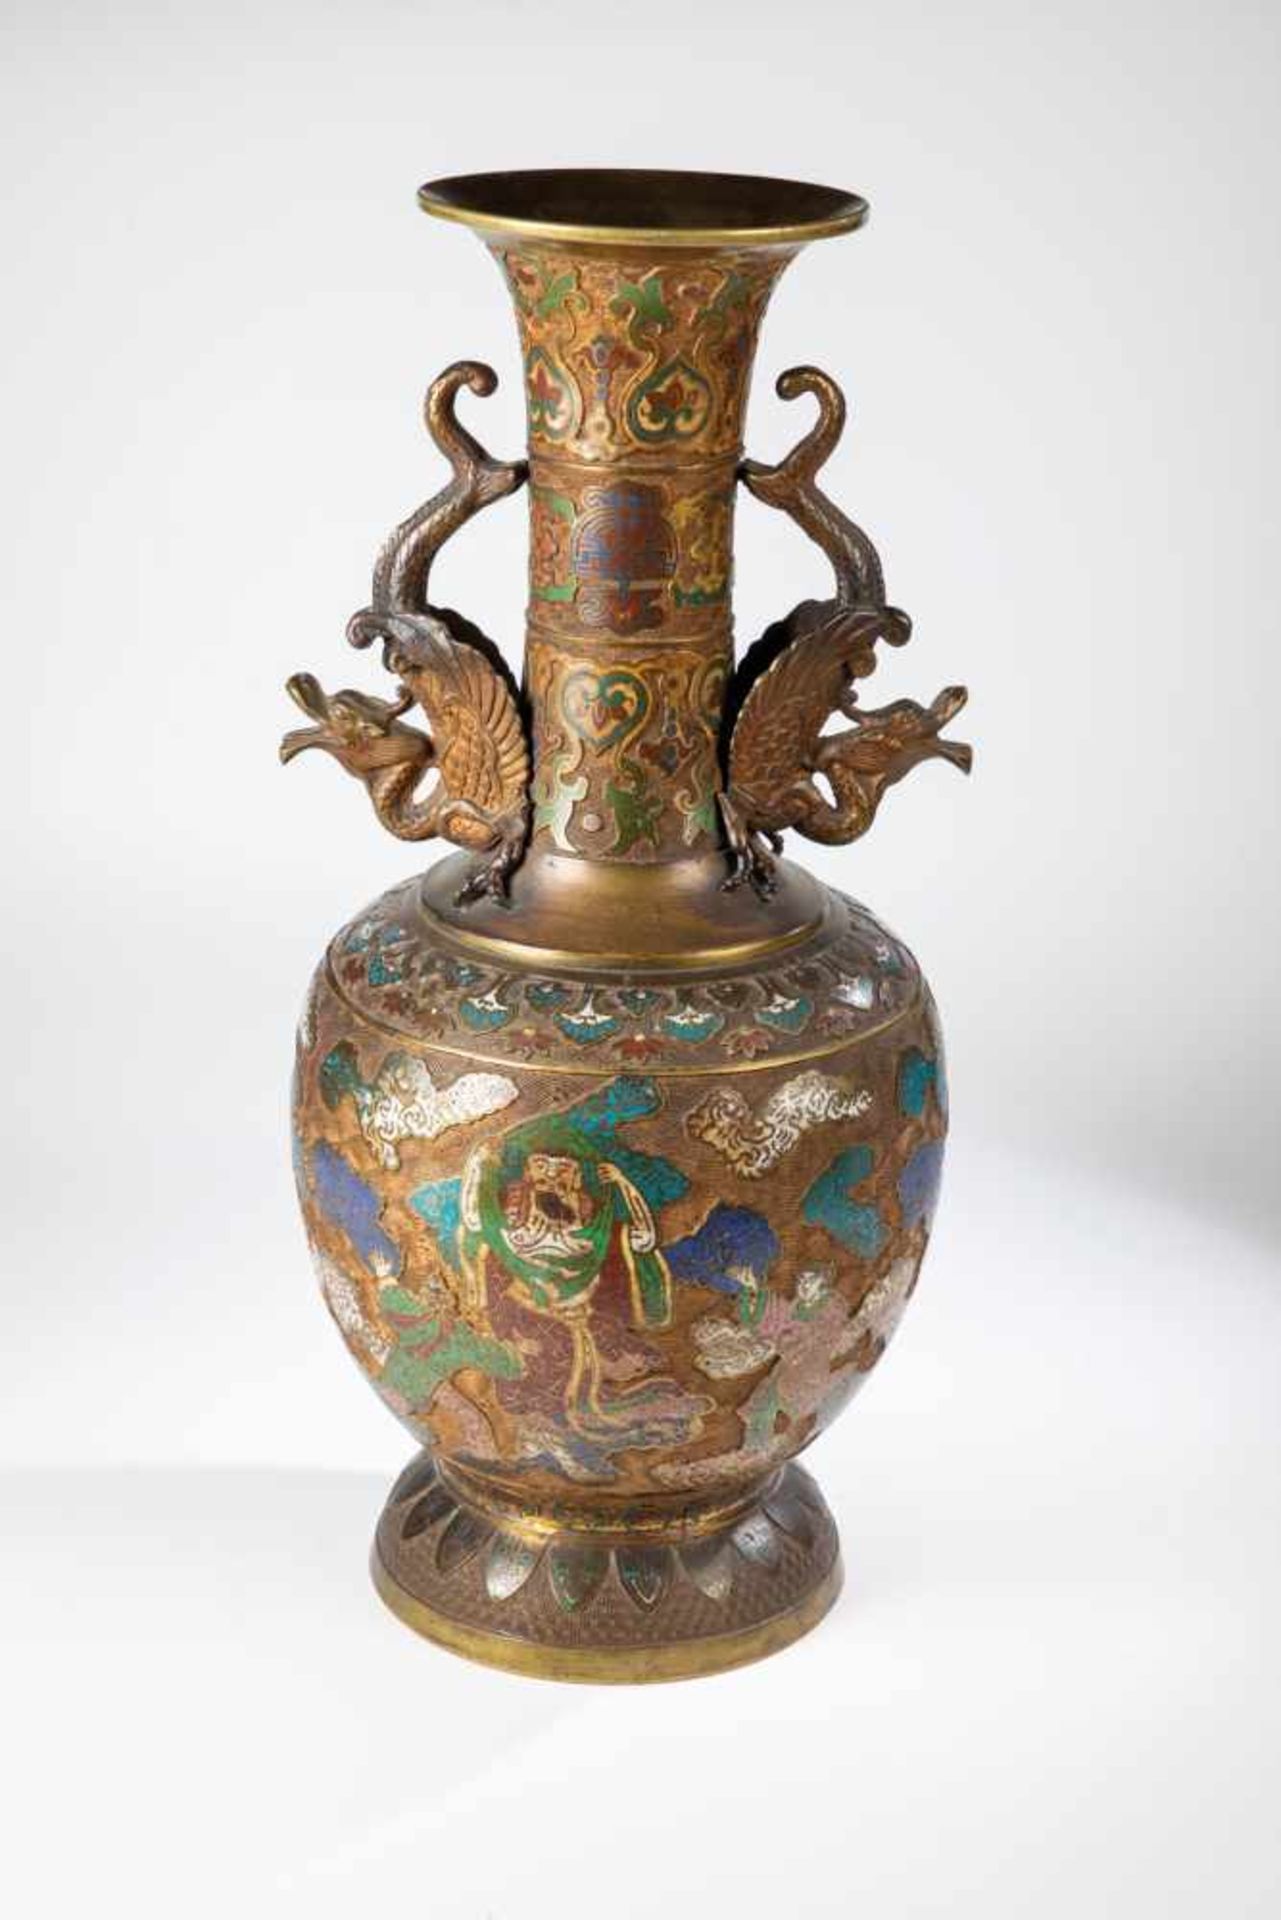 Vase. China, probably 18th/19th century. Baluster-shaped vase with two plastic dragonhandles. All-